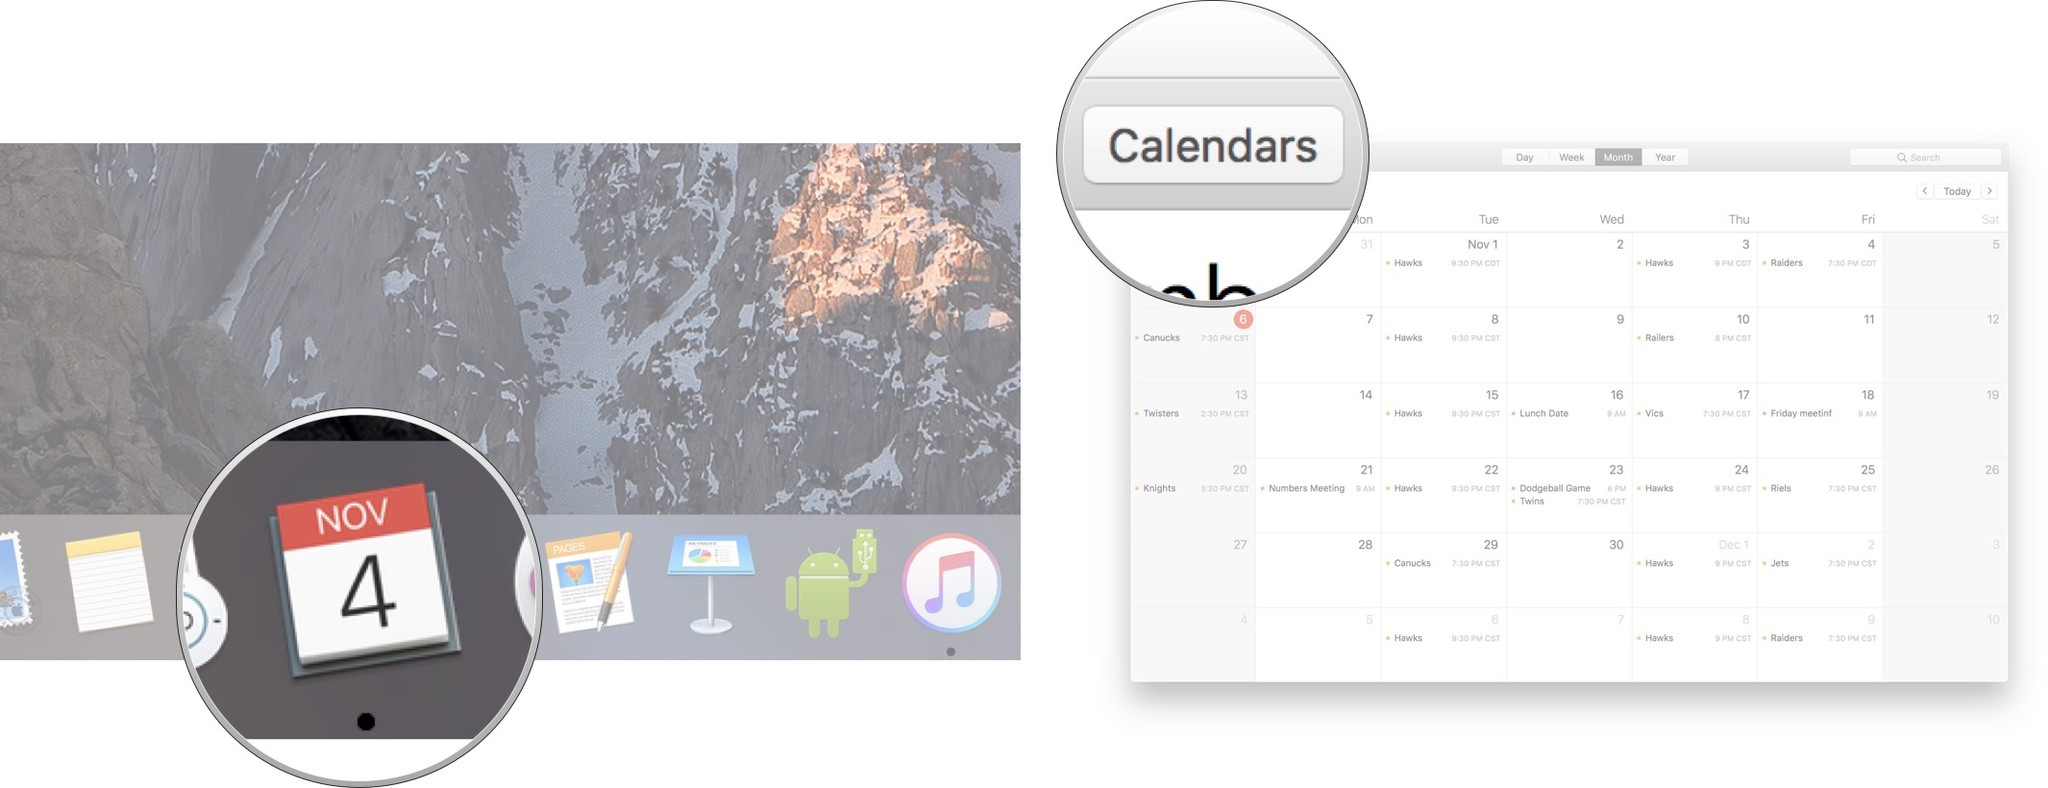 Launch the Calendar and then click Calendars.